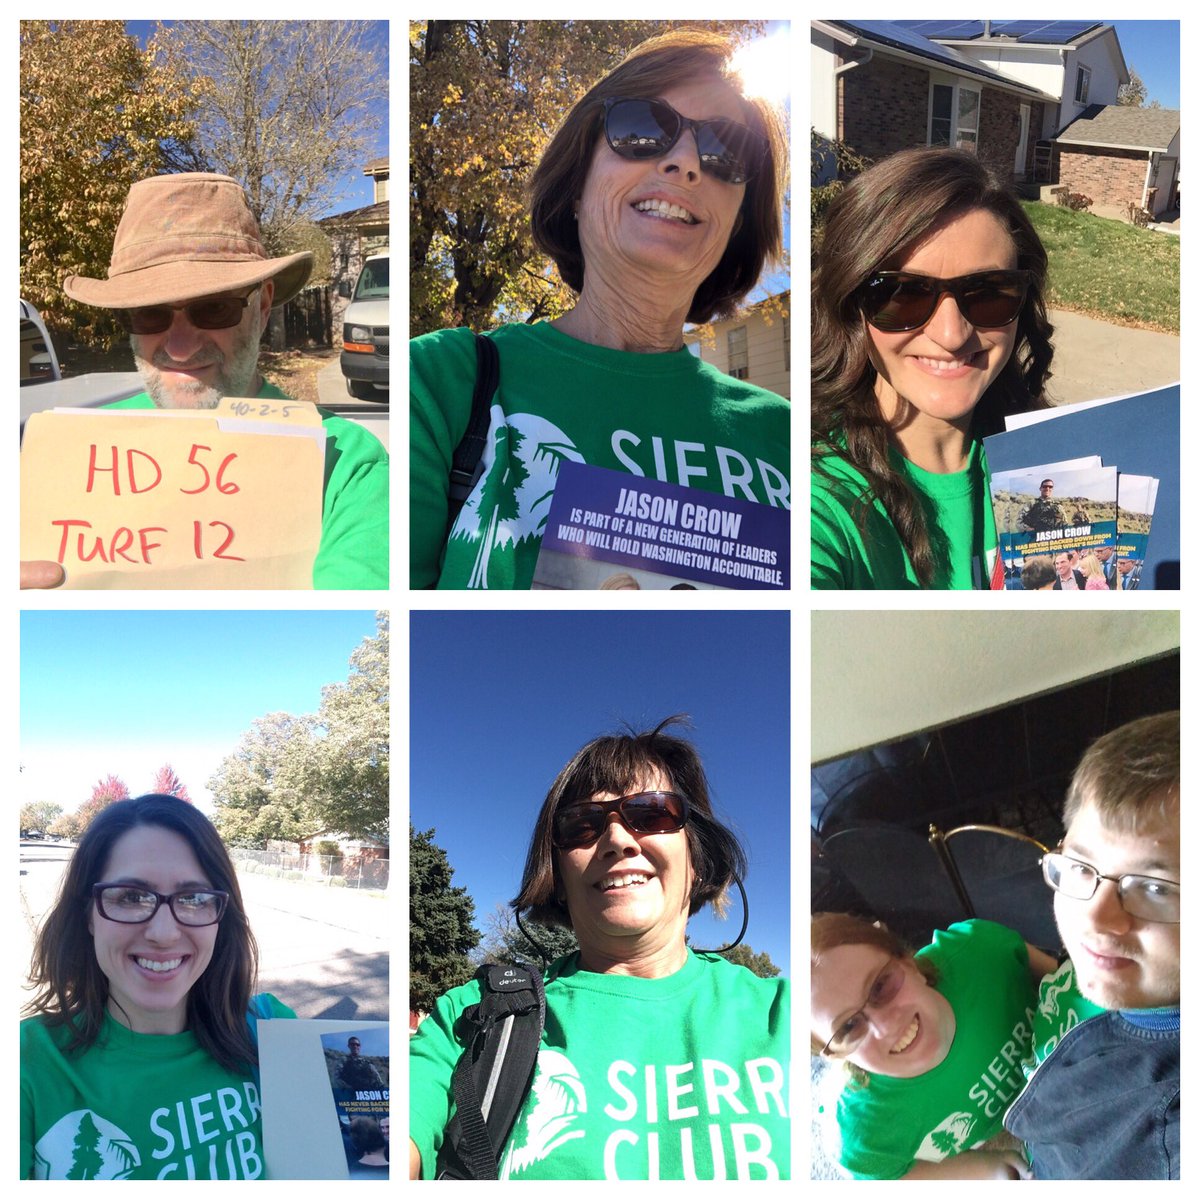 Knock knock!
Who’s there? 
It’s Sierra Club #VictoryCorps! Have you turned in your ballot? 👋🏼